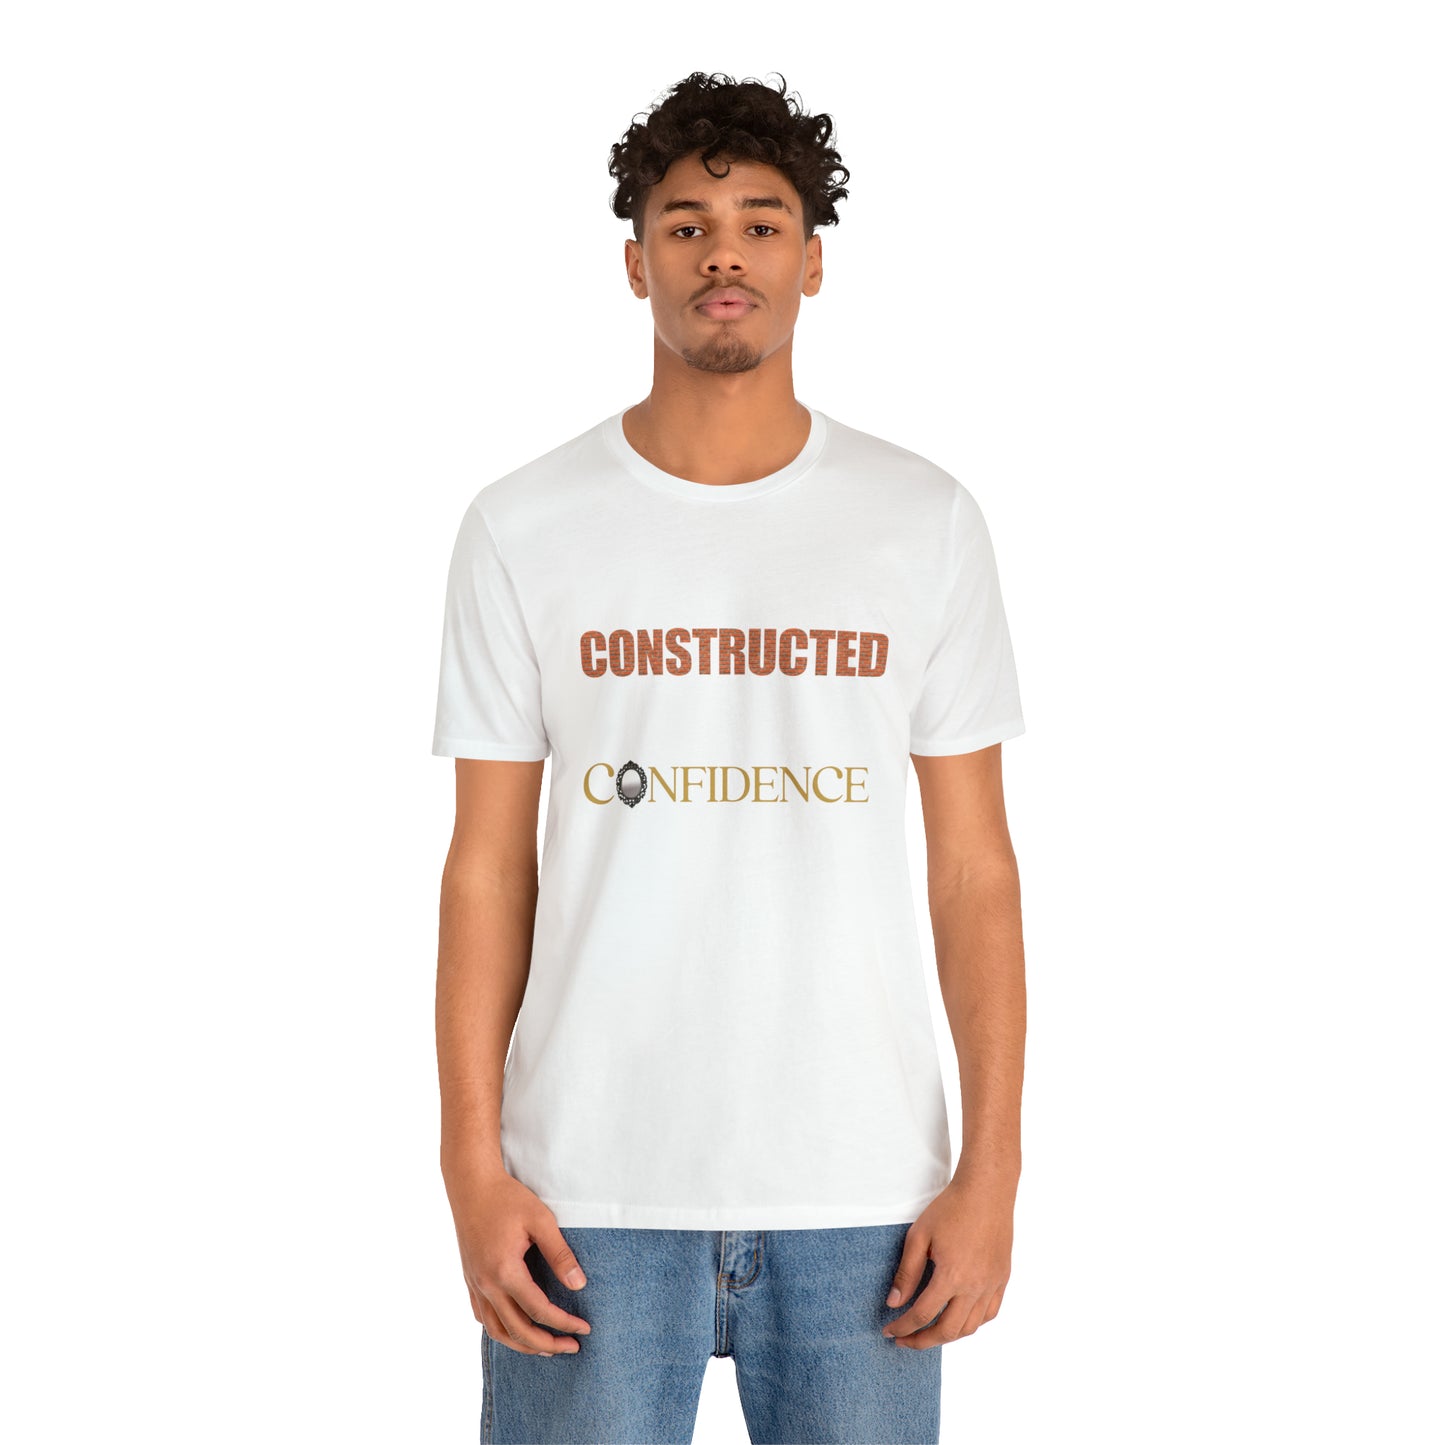 Constructed with confidence Unisex Jersey Short Sleeve Tee